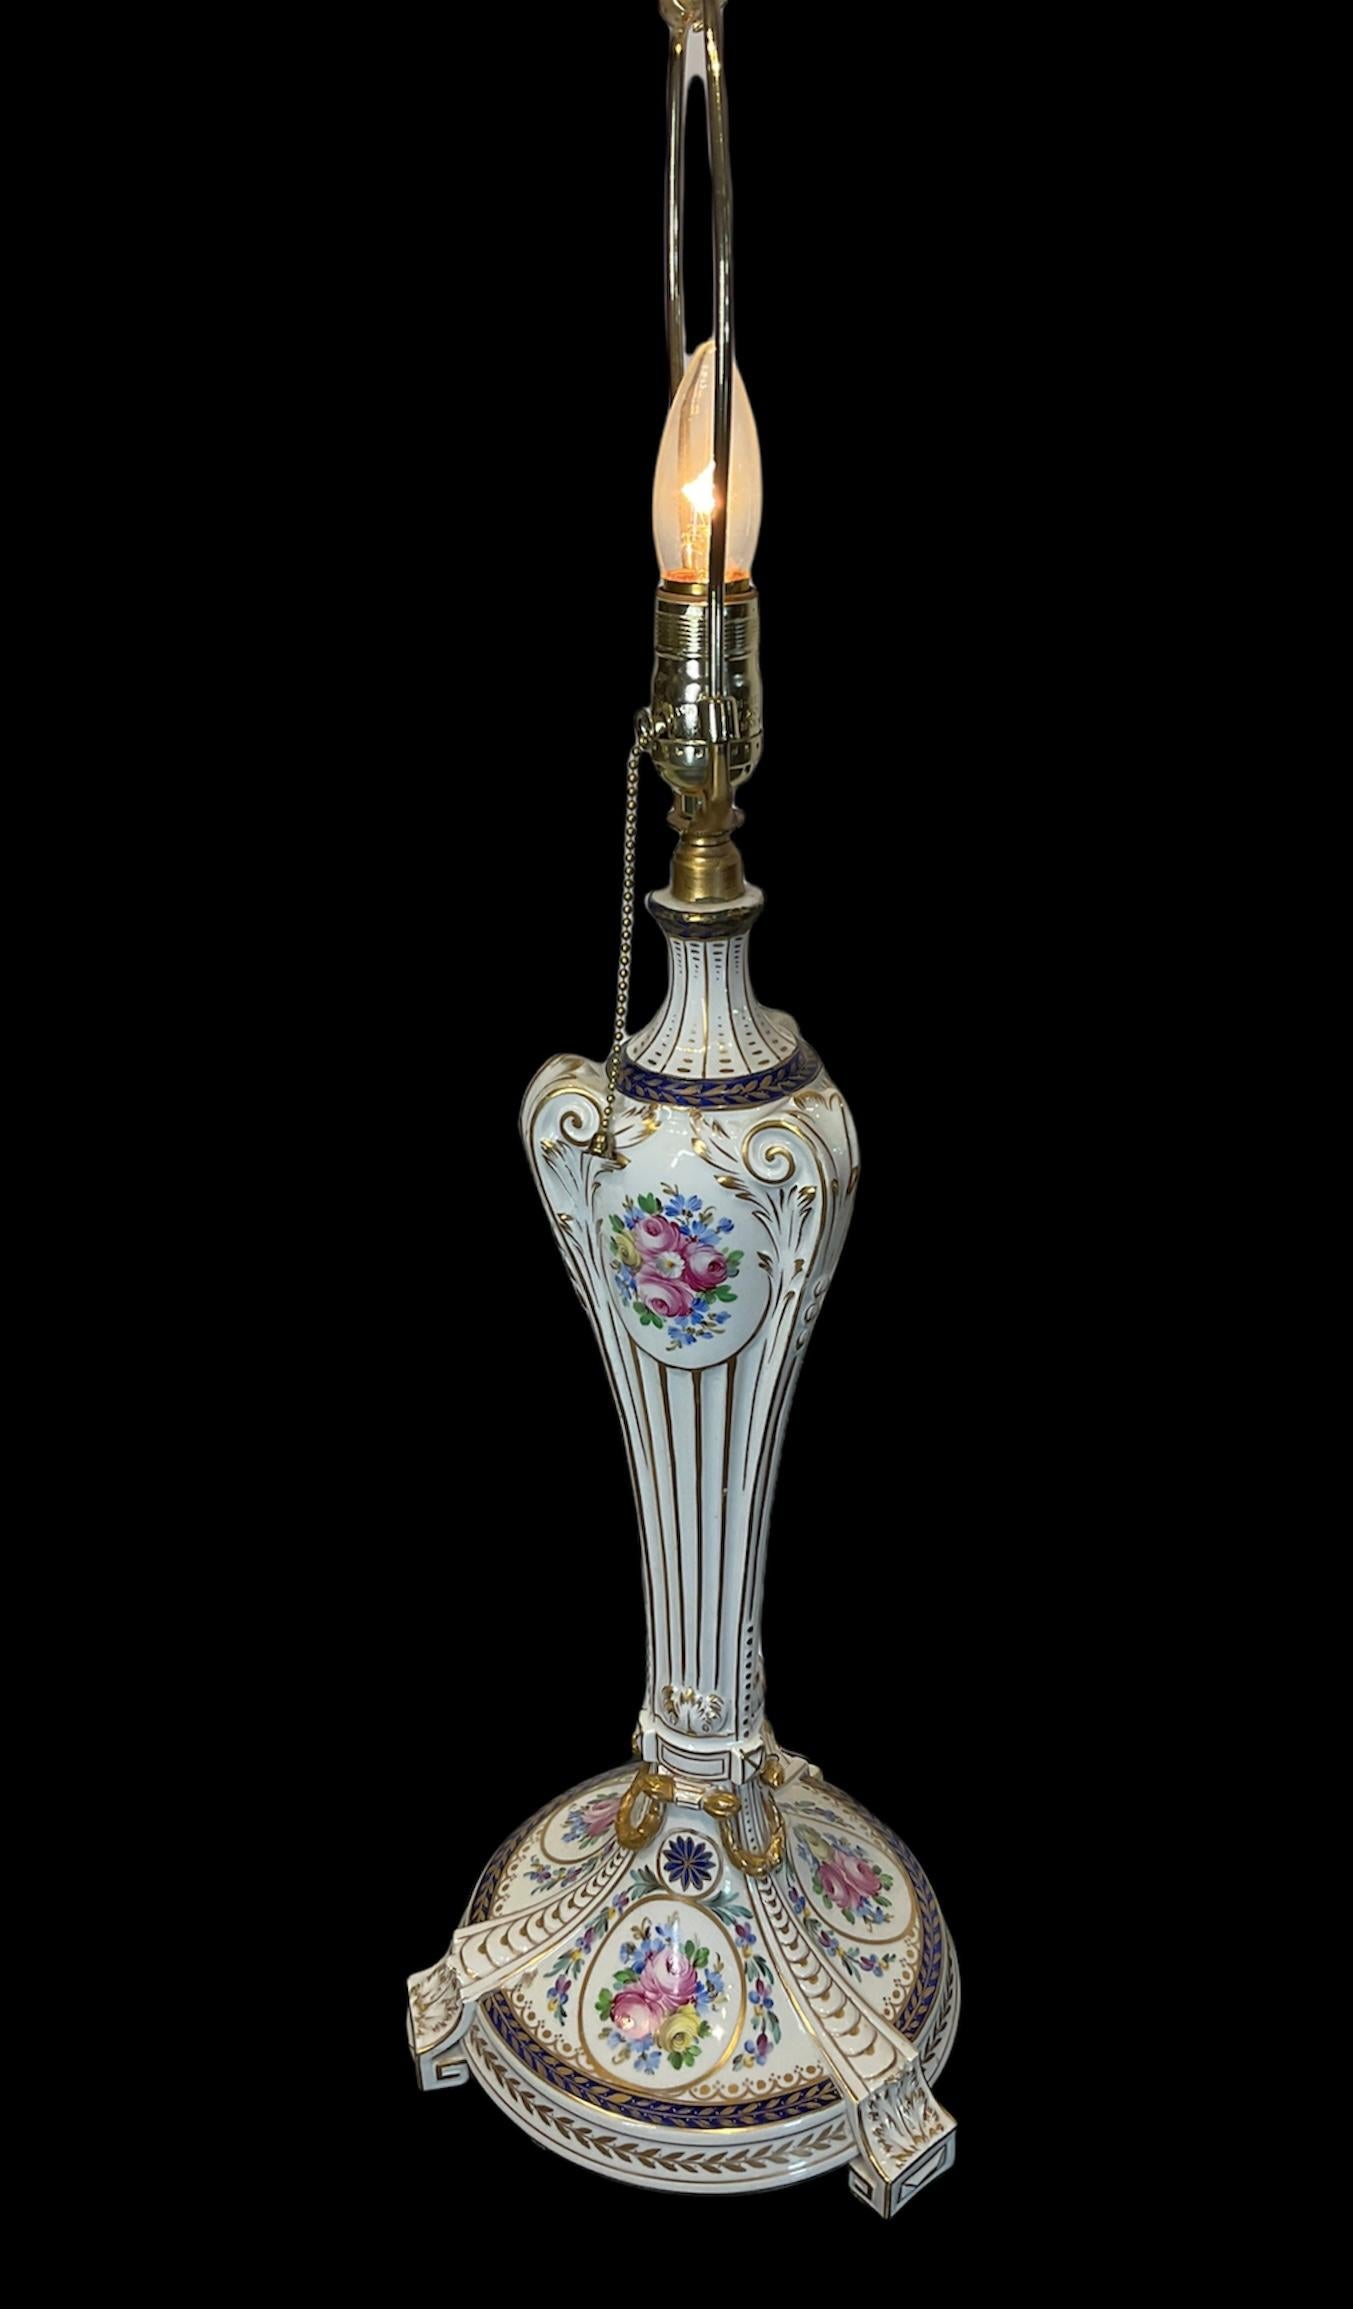 This is a Dresden hand painted porcelain table lamp. It is long and urn shaped. It has a white background with gilt fluted details that form scrolls at the top. The lamp is embellished by oval frames made of acanthus leaves with bouquets of roses in